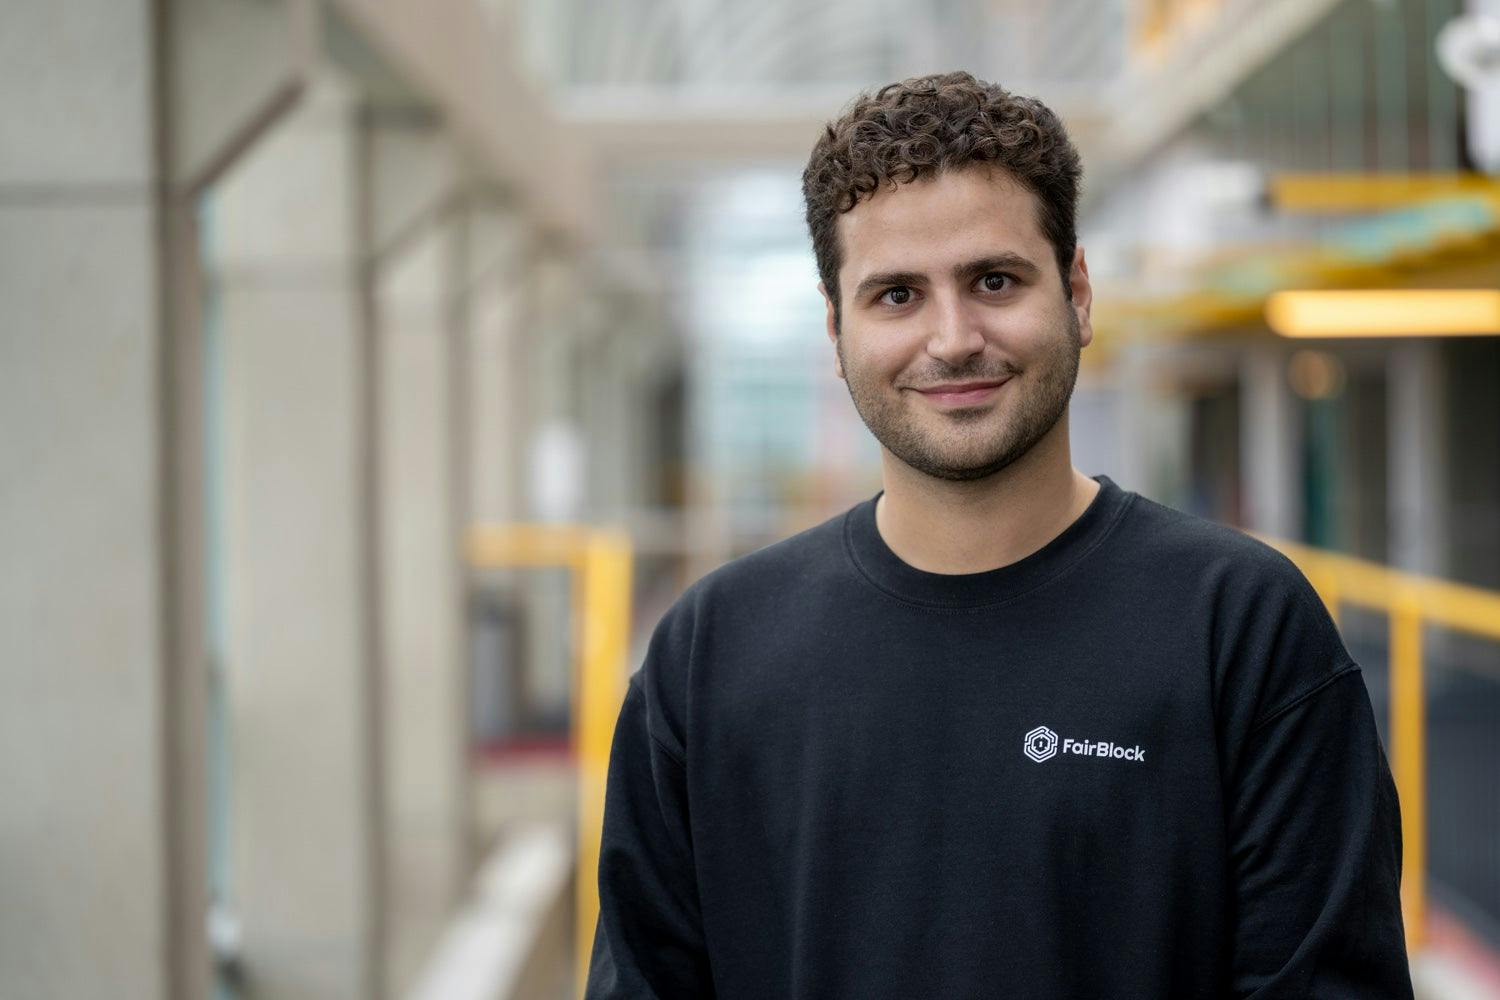 Fairblock, company co-founded by Cheriton alumnus Peyman Momeni, secures $2.5M USD for privacy of decentralized applications